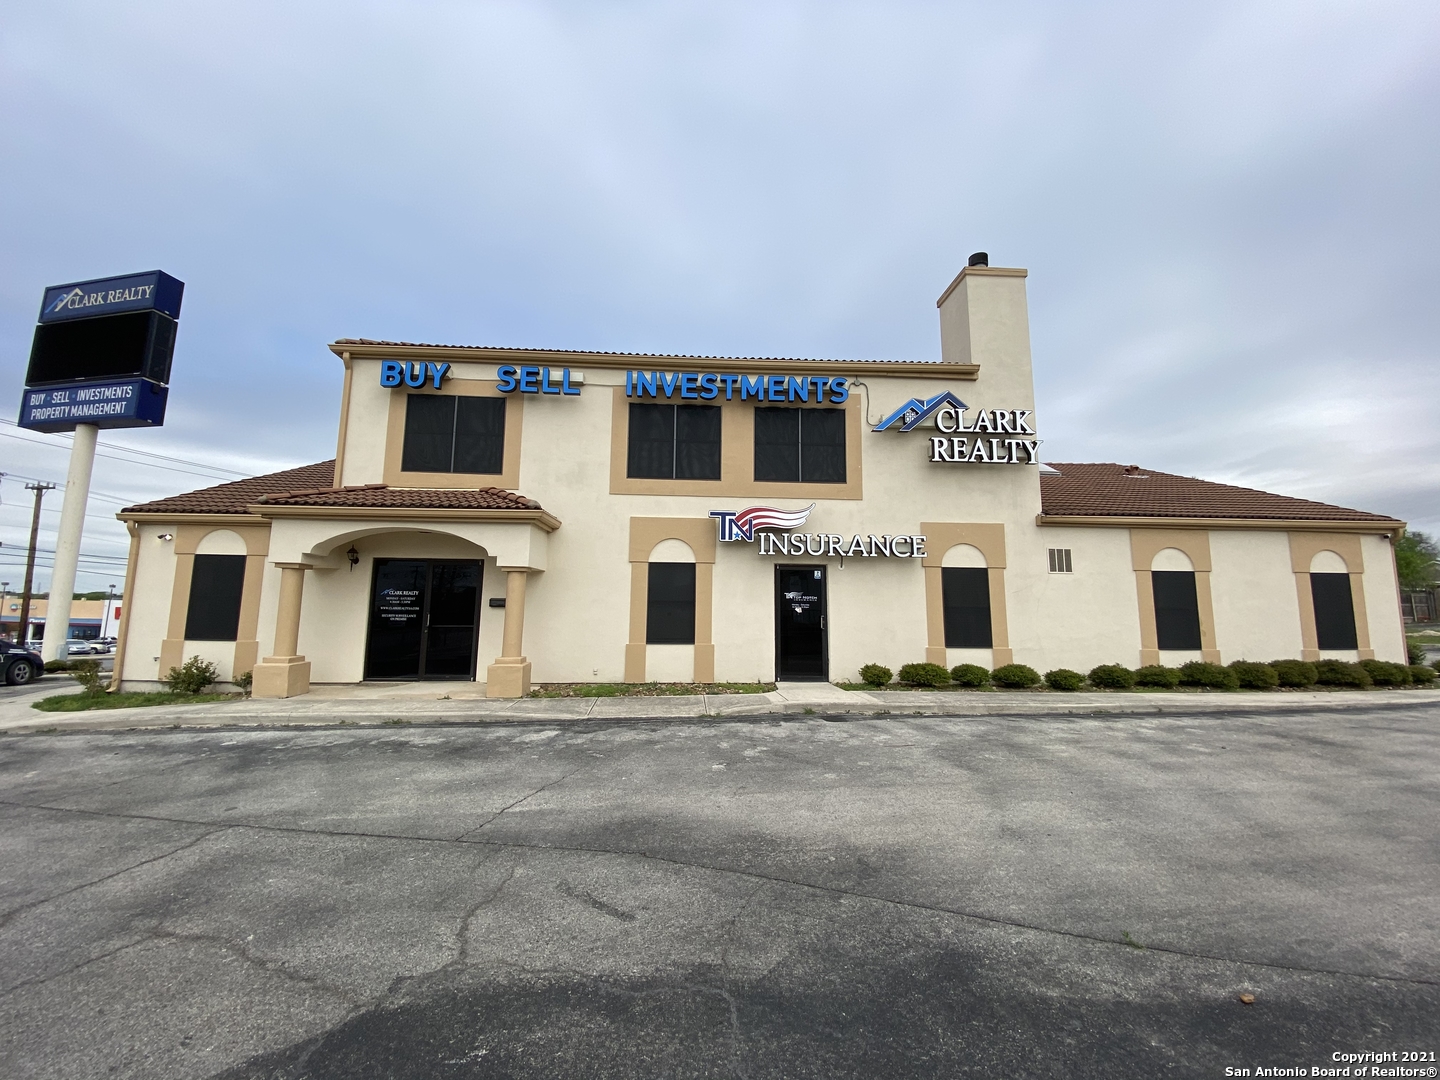 Two story stucco, 3,742 SF building on +/- 1.06 Acres. 2nd Floor has kitchen and additional office and conference area. Great set up for real estate office or medical office. Zoned C-3 NA. Extra land for building expansion or extra parking. Cross access agreement with Walgreens. Heavy traffic and good visibility.